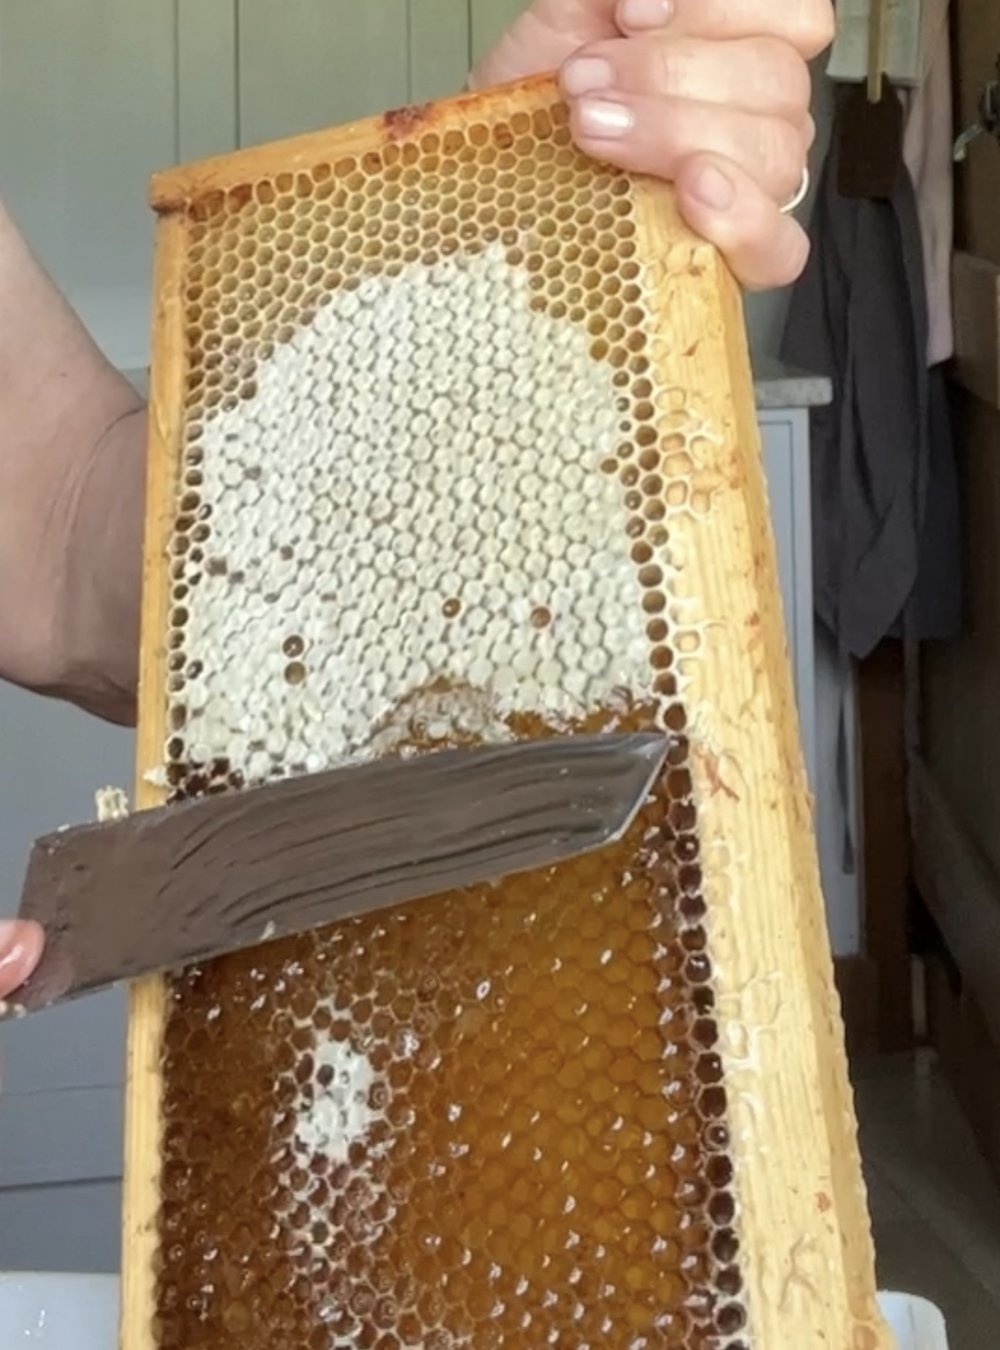 UNCAPPING THE HONEY